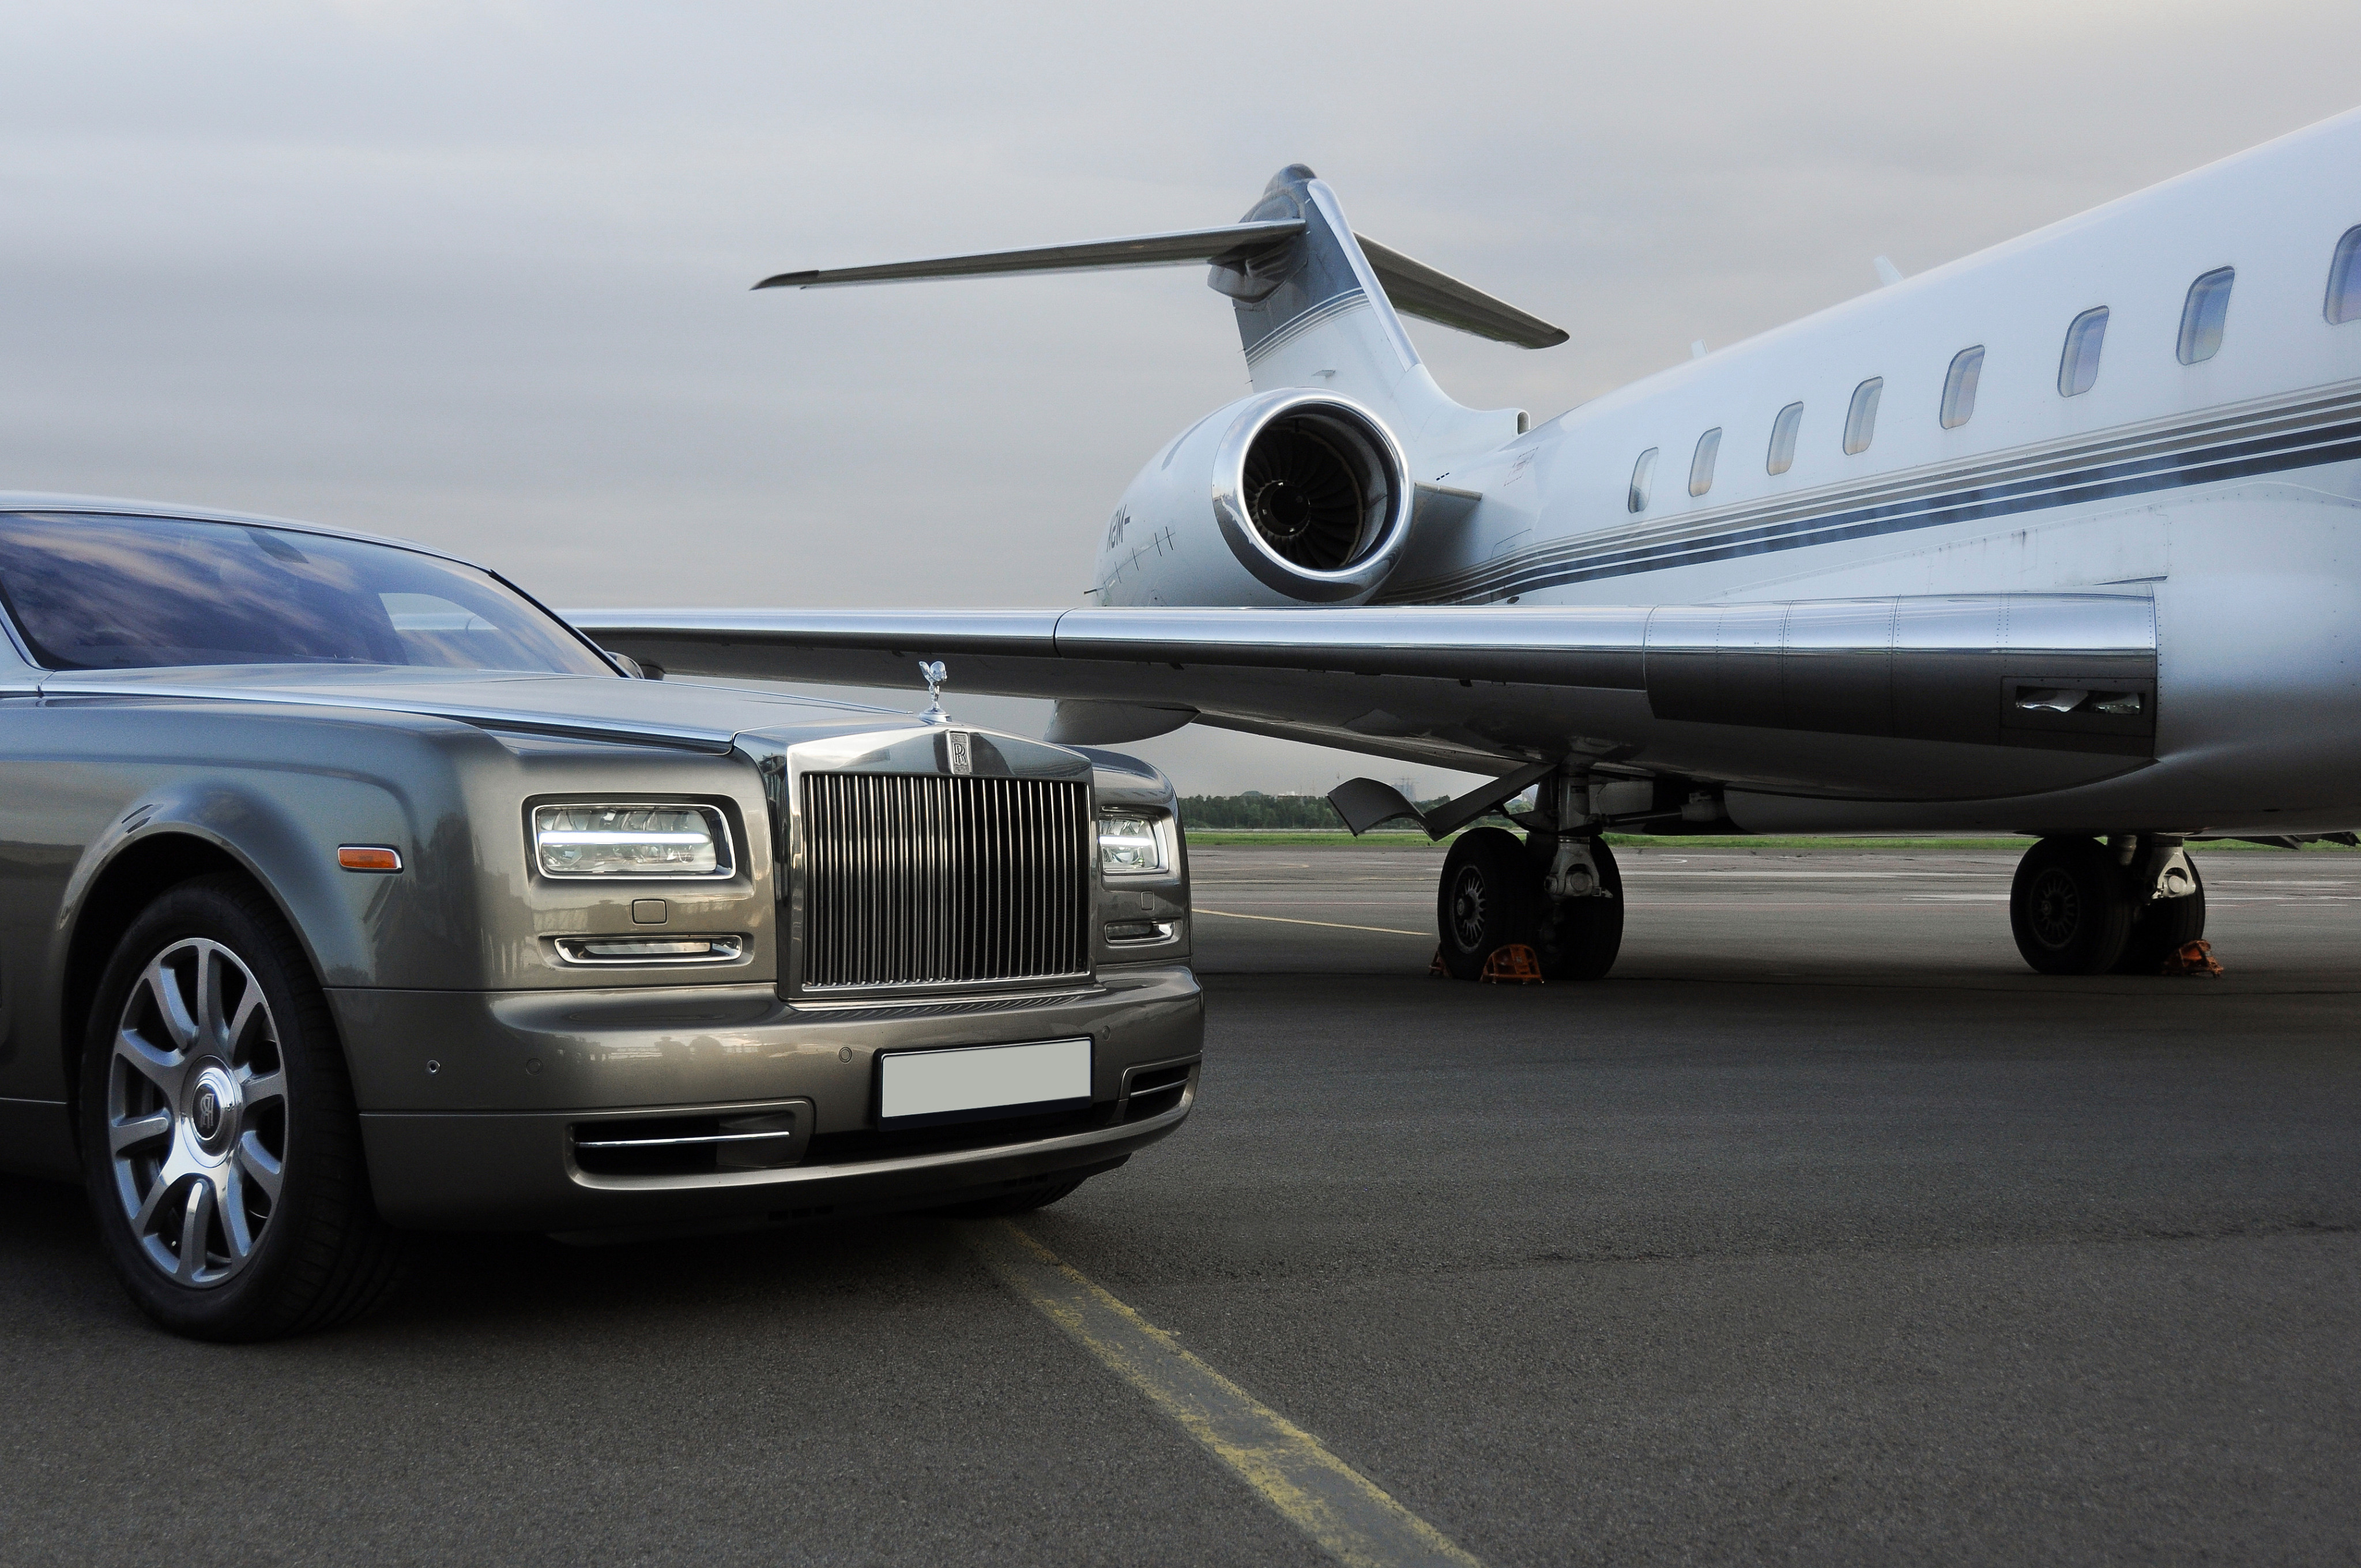 Private executive airplane with limousine Rolls Royce Phantom luxury car shown together at an airport runway. Photo: Shutterstock